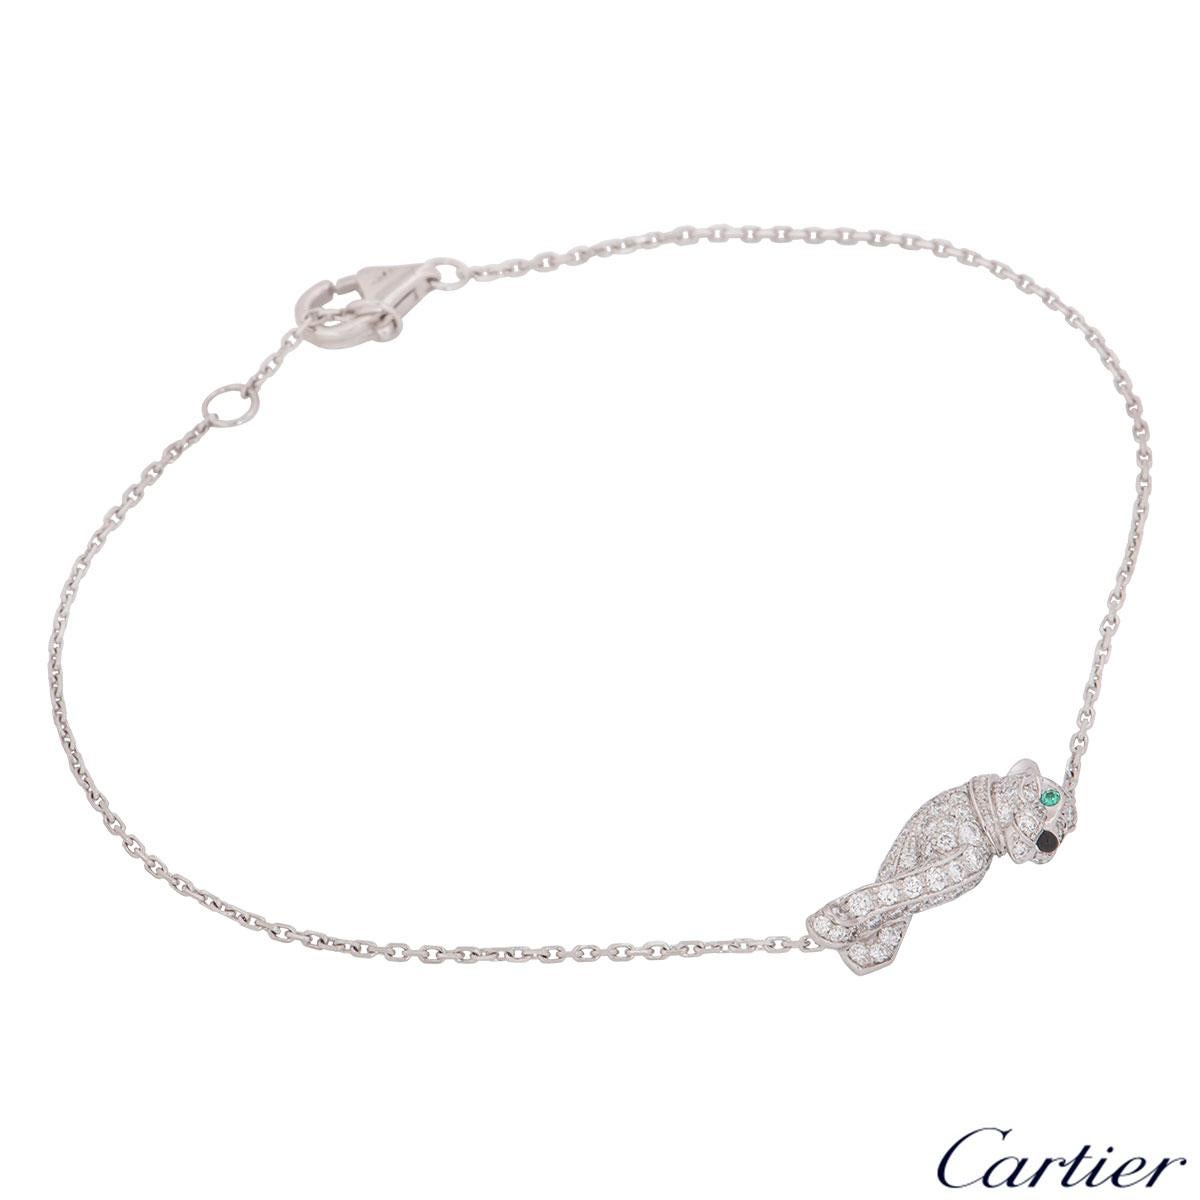 A stylish 18k white gold bracelet by Cartier from the Panthere De Cartier collection. The bracelet comprises of a panthere motif is set with 78 diamonds with a weight of 0.38ct, tsavorite eyes and a black lacquer nose. The panthere measures 0.80cm